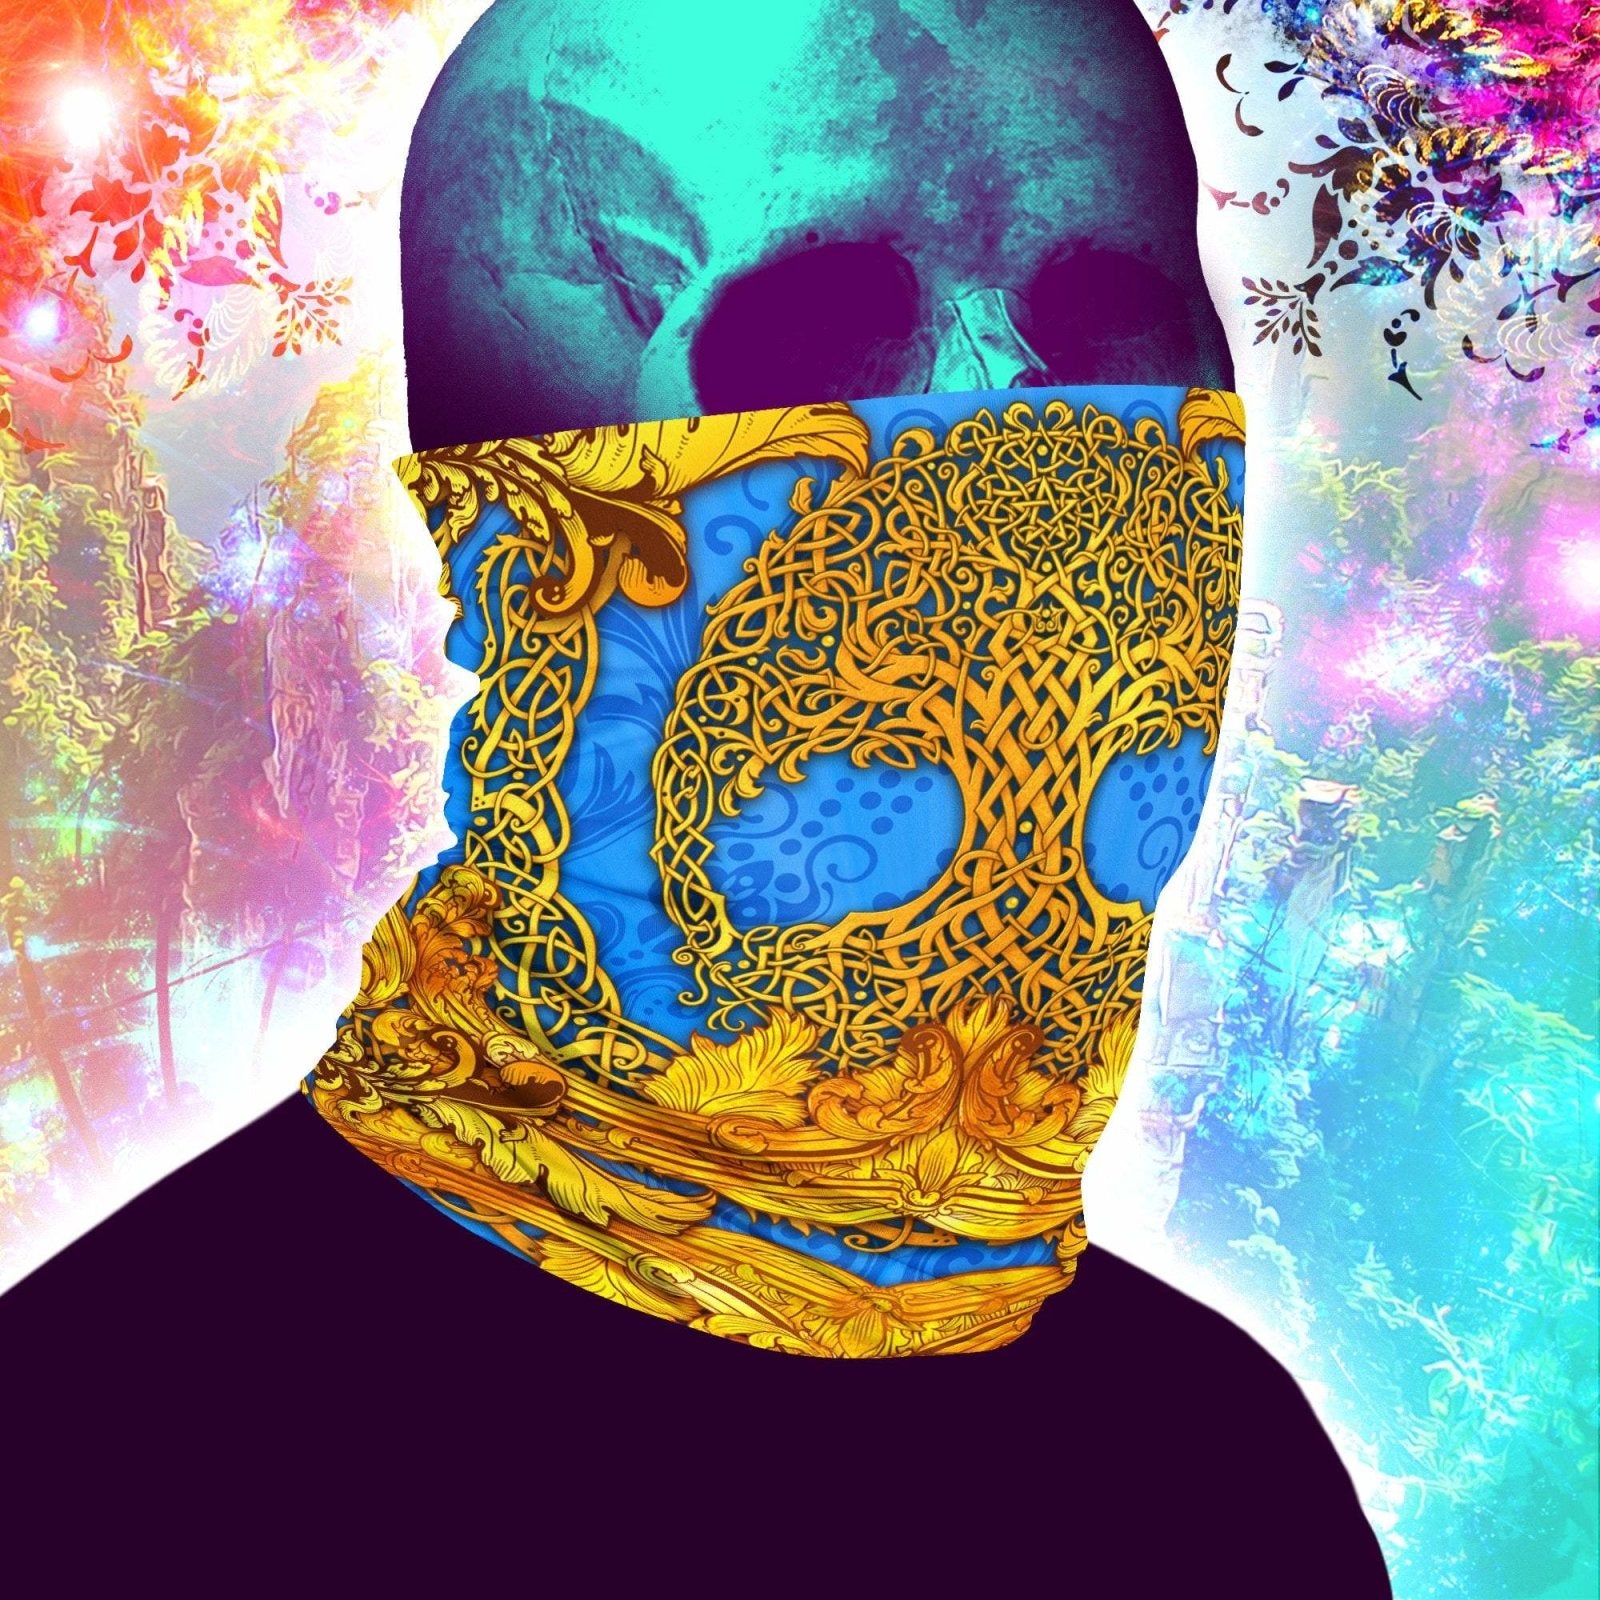 Celtic Neck Gaiter, Face Mask, Head Covering, Pagan Outfit, Tree of Life, Witchy - Cyan & Gold - Abysm Internal